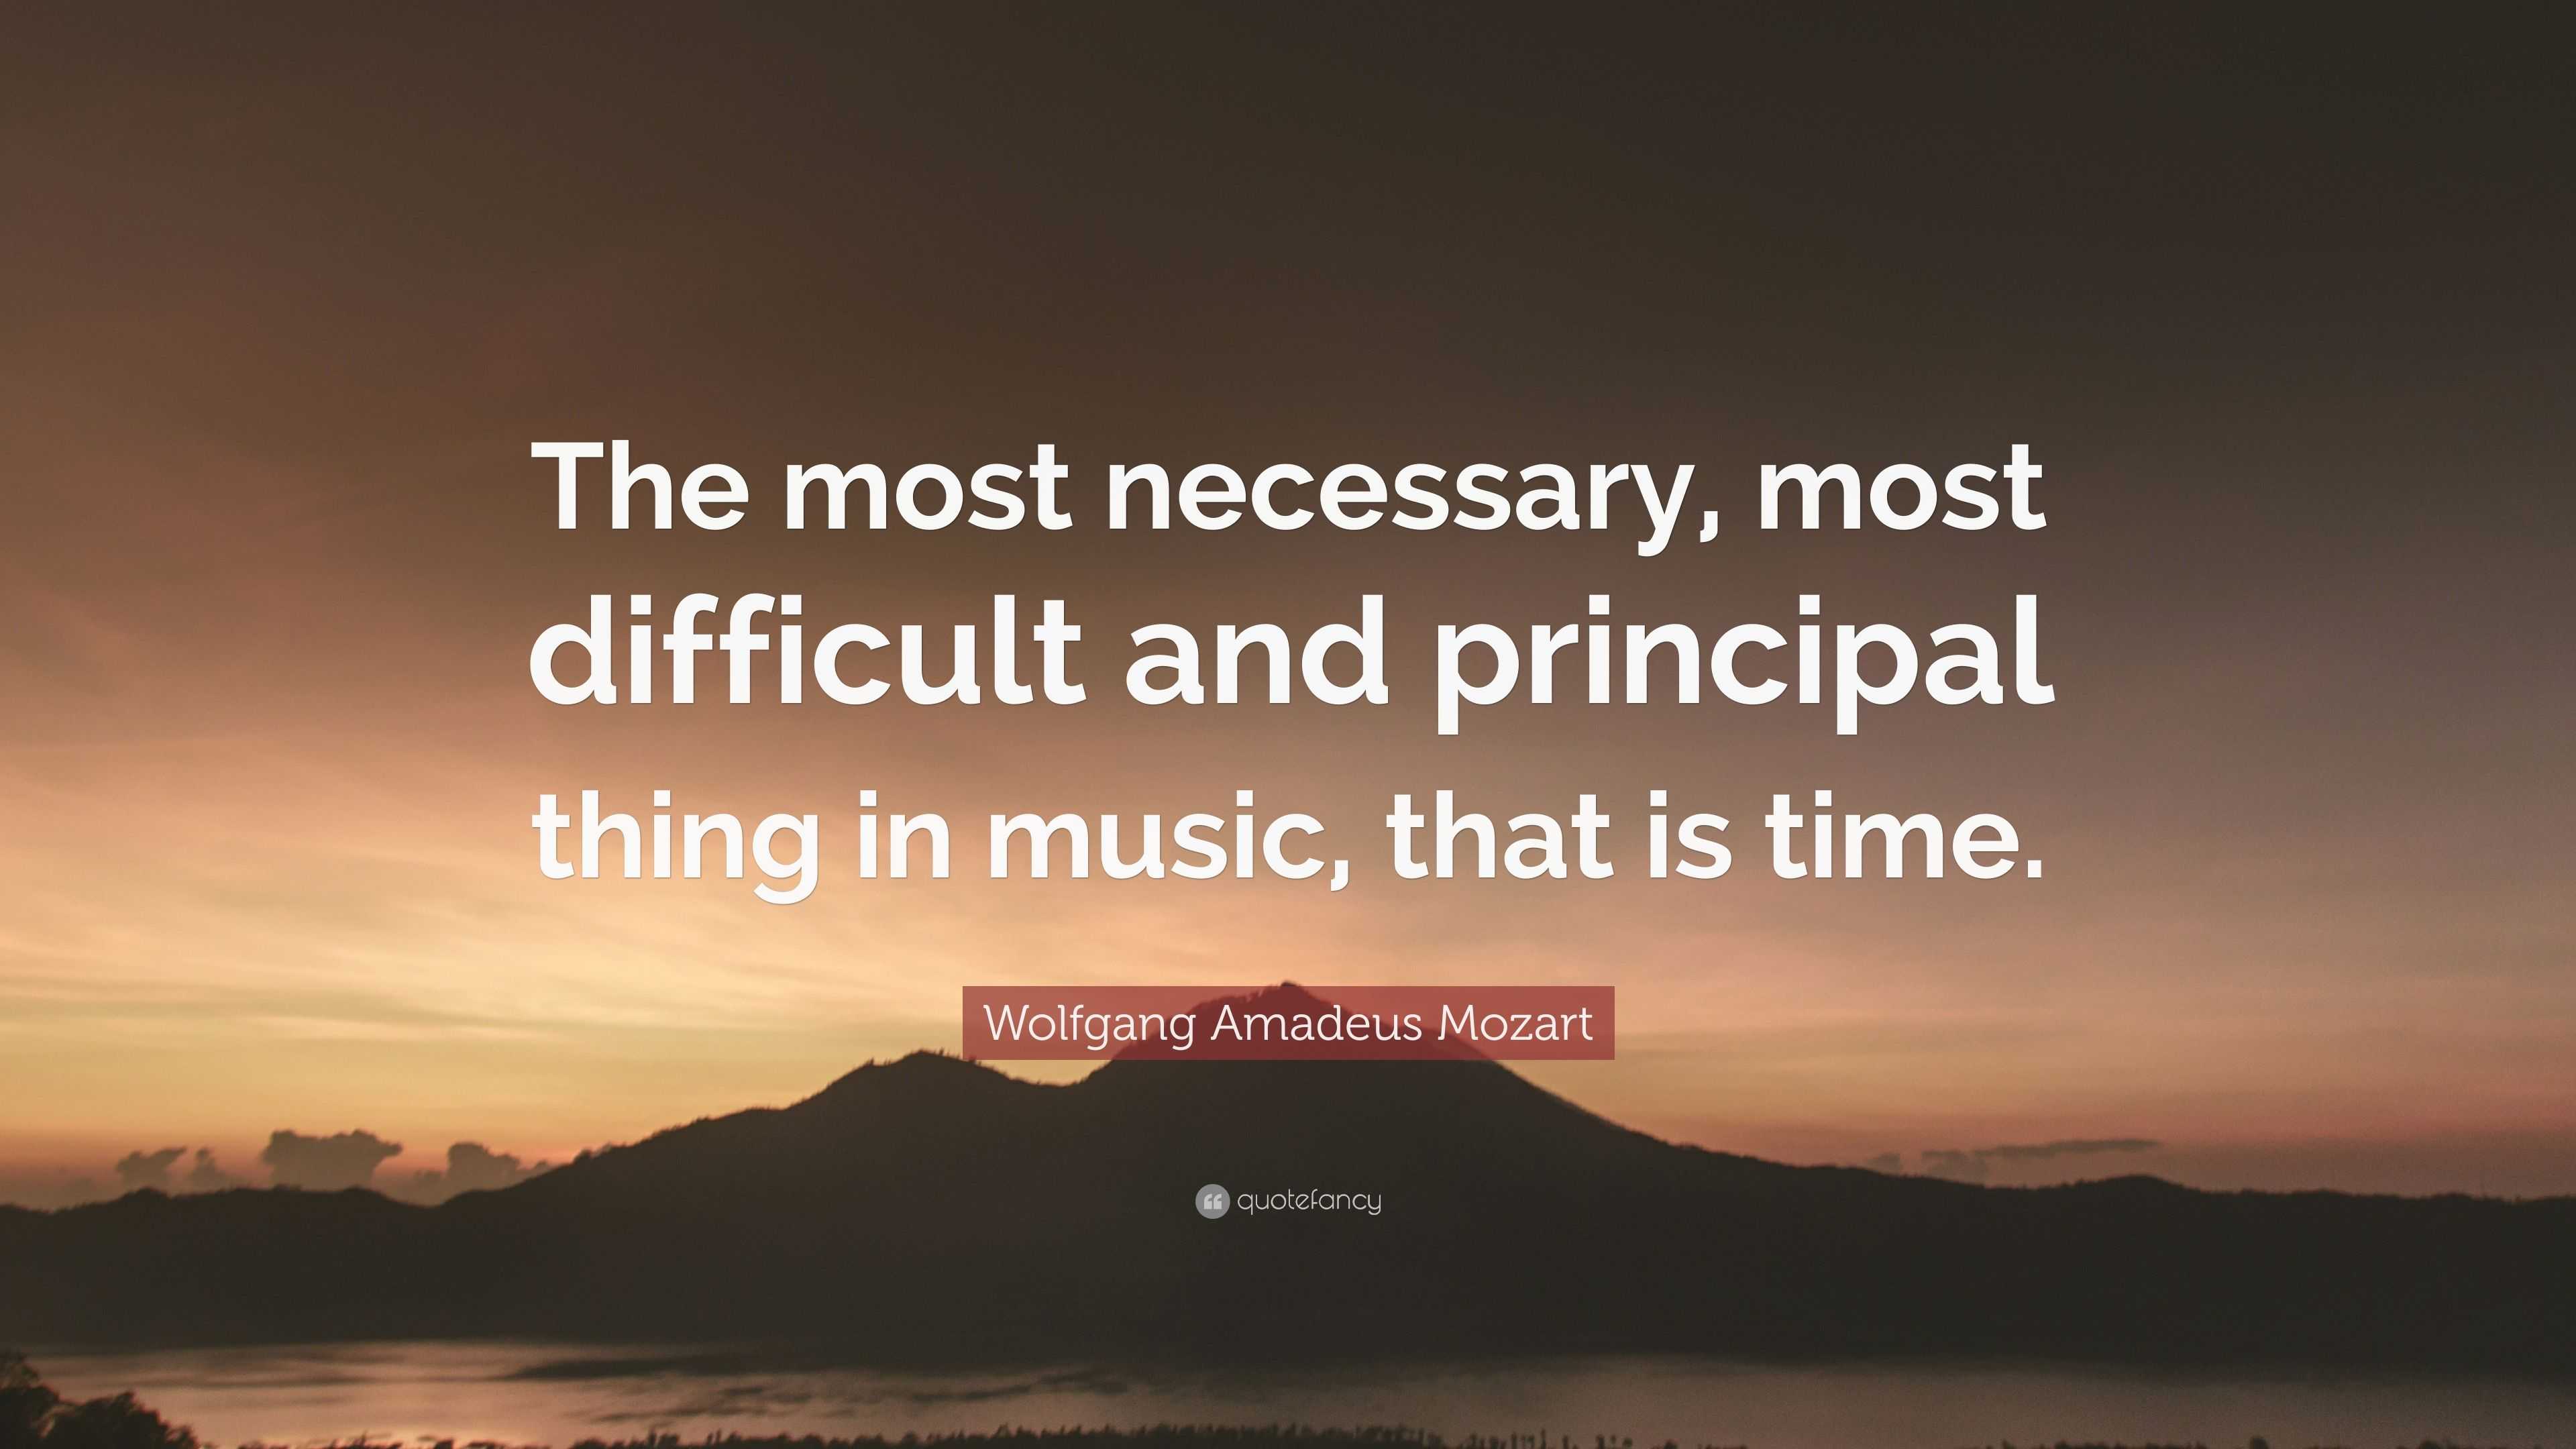 Wolfgang Amadeus Mozart Quote: “The most necessary, most difficult and ...